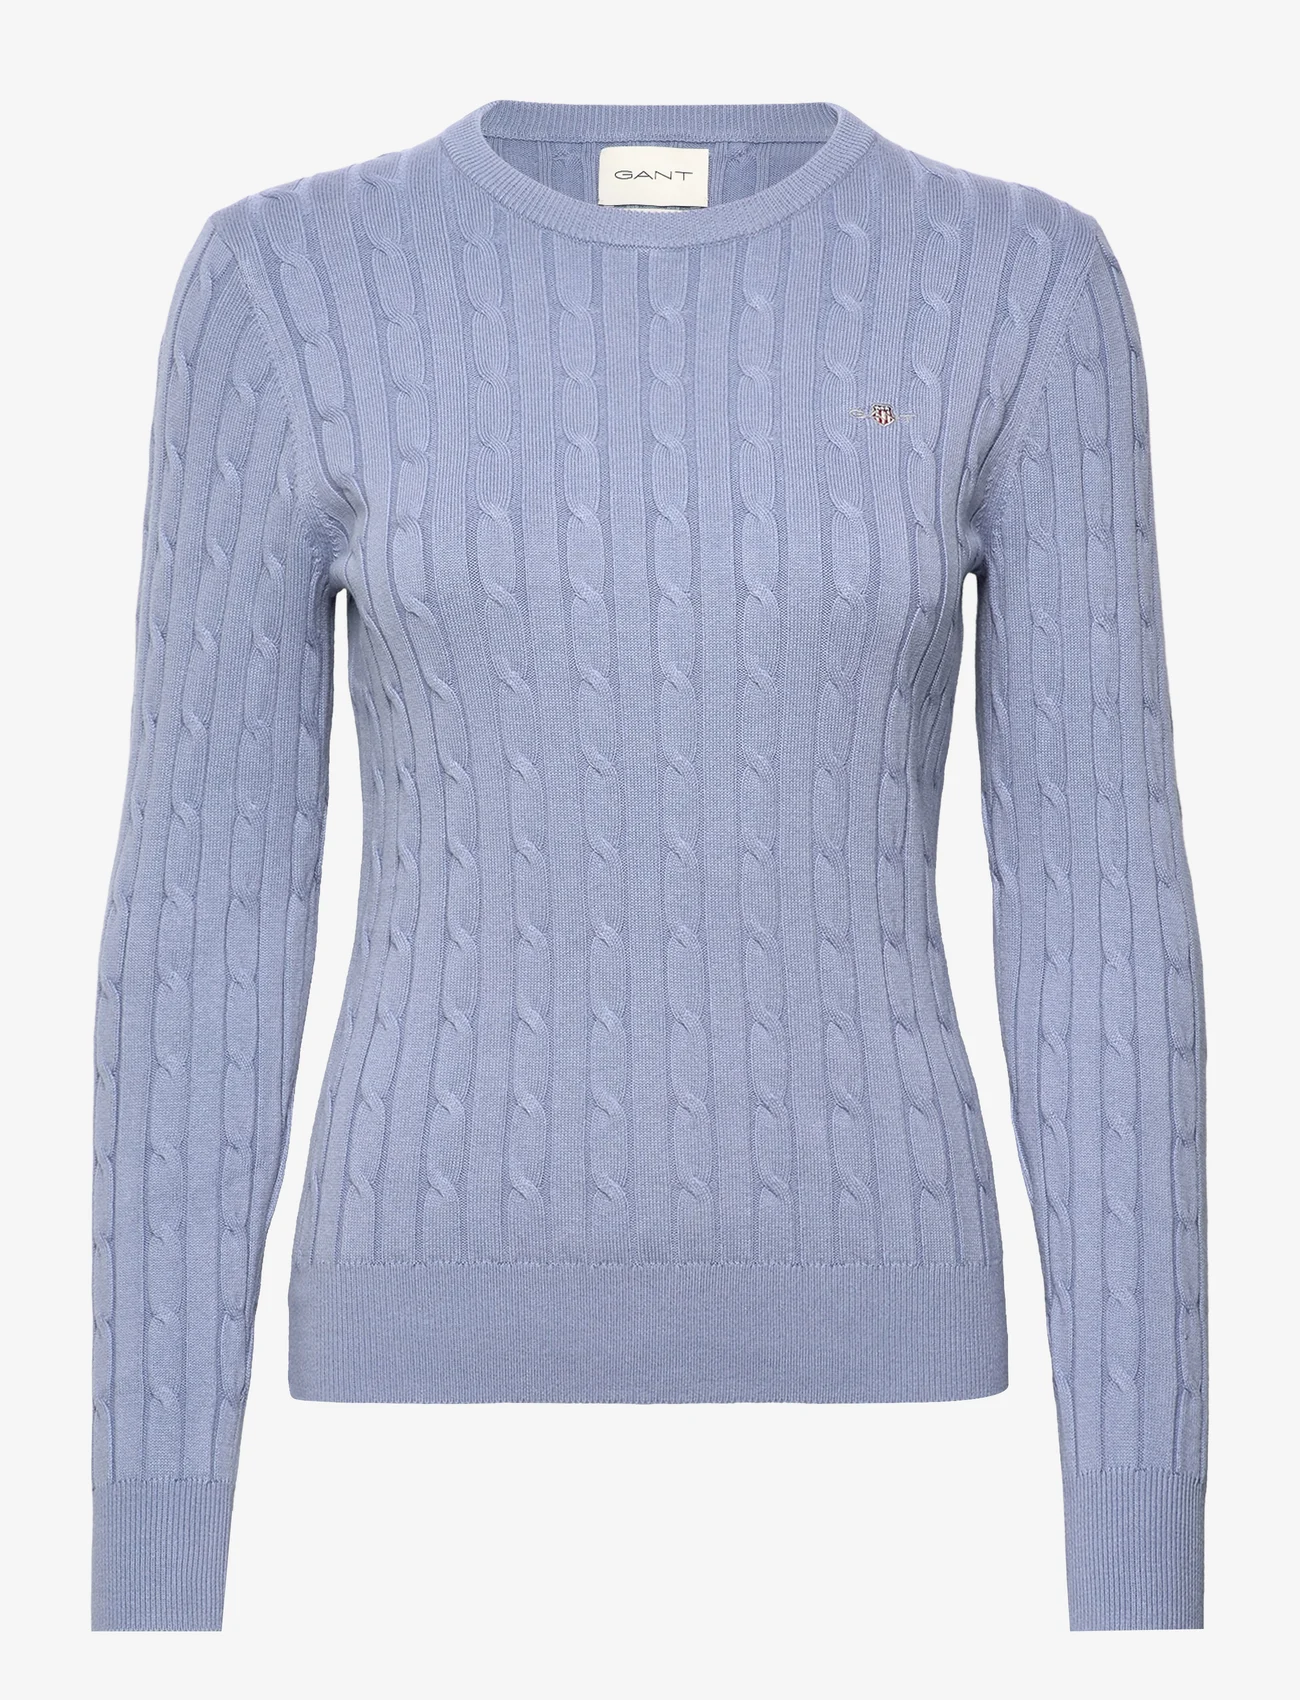 GANT - STRETCH COTTON CABLE C-NECK - jumpers - blue water - 0